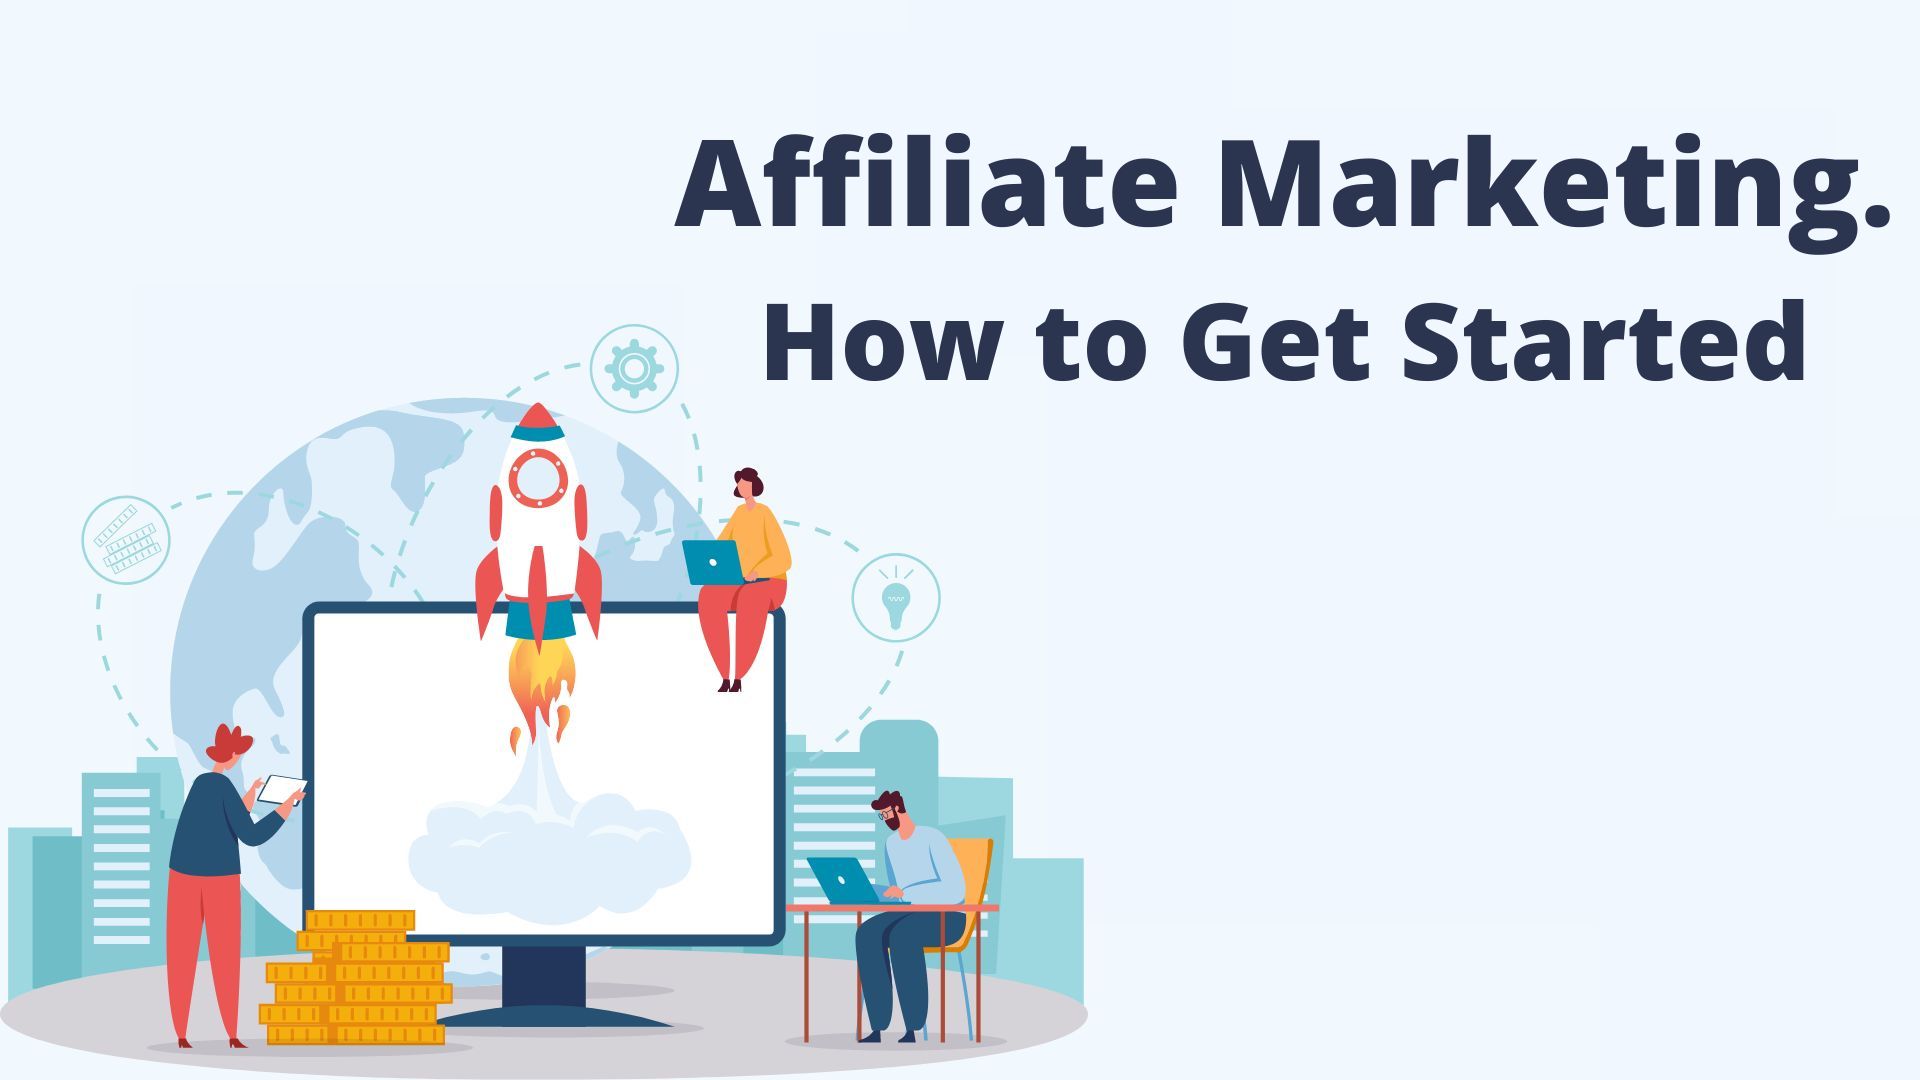 Affiliate Marketing. How to Get Started